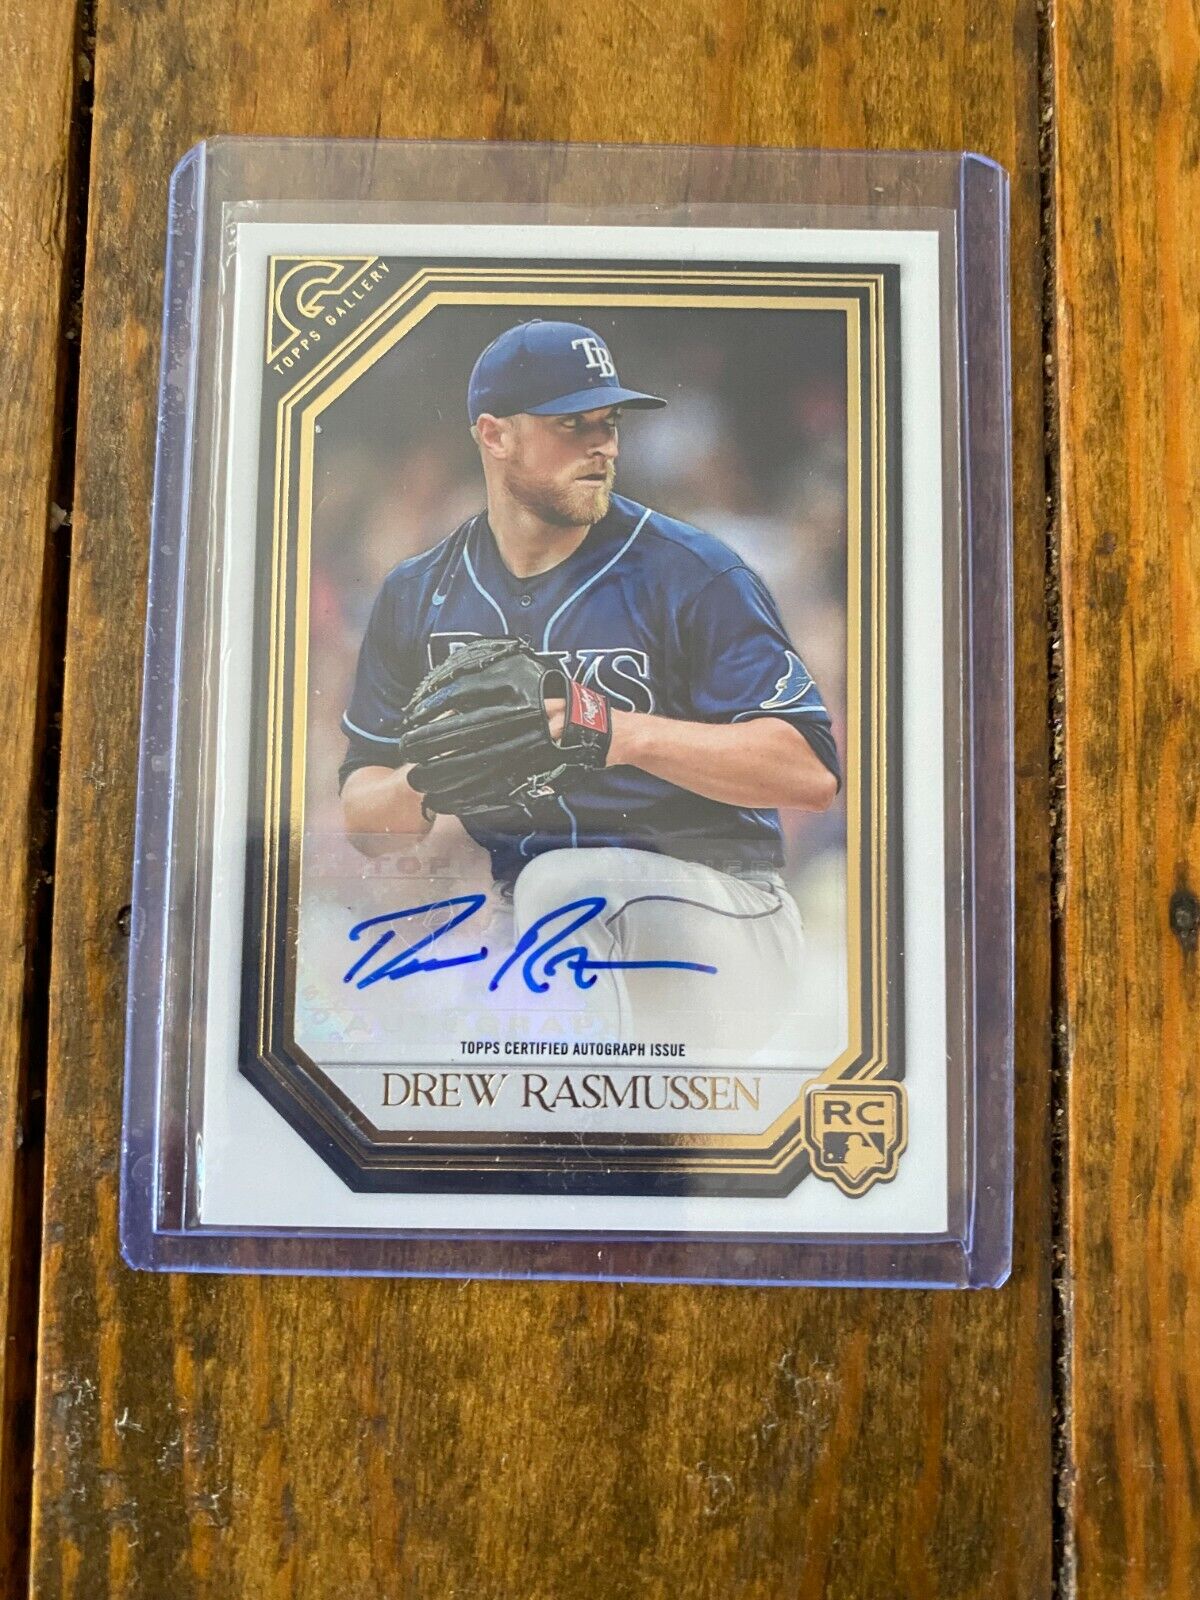 2021 Topps Gallery Drew Rasmussen Auto Rookie Card Tampa Bay Rays. rookie card picture